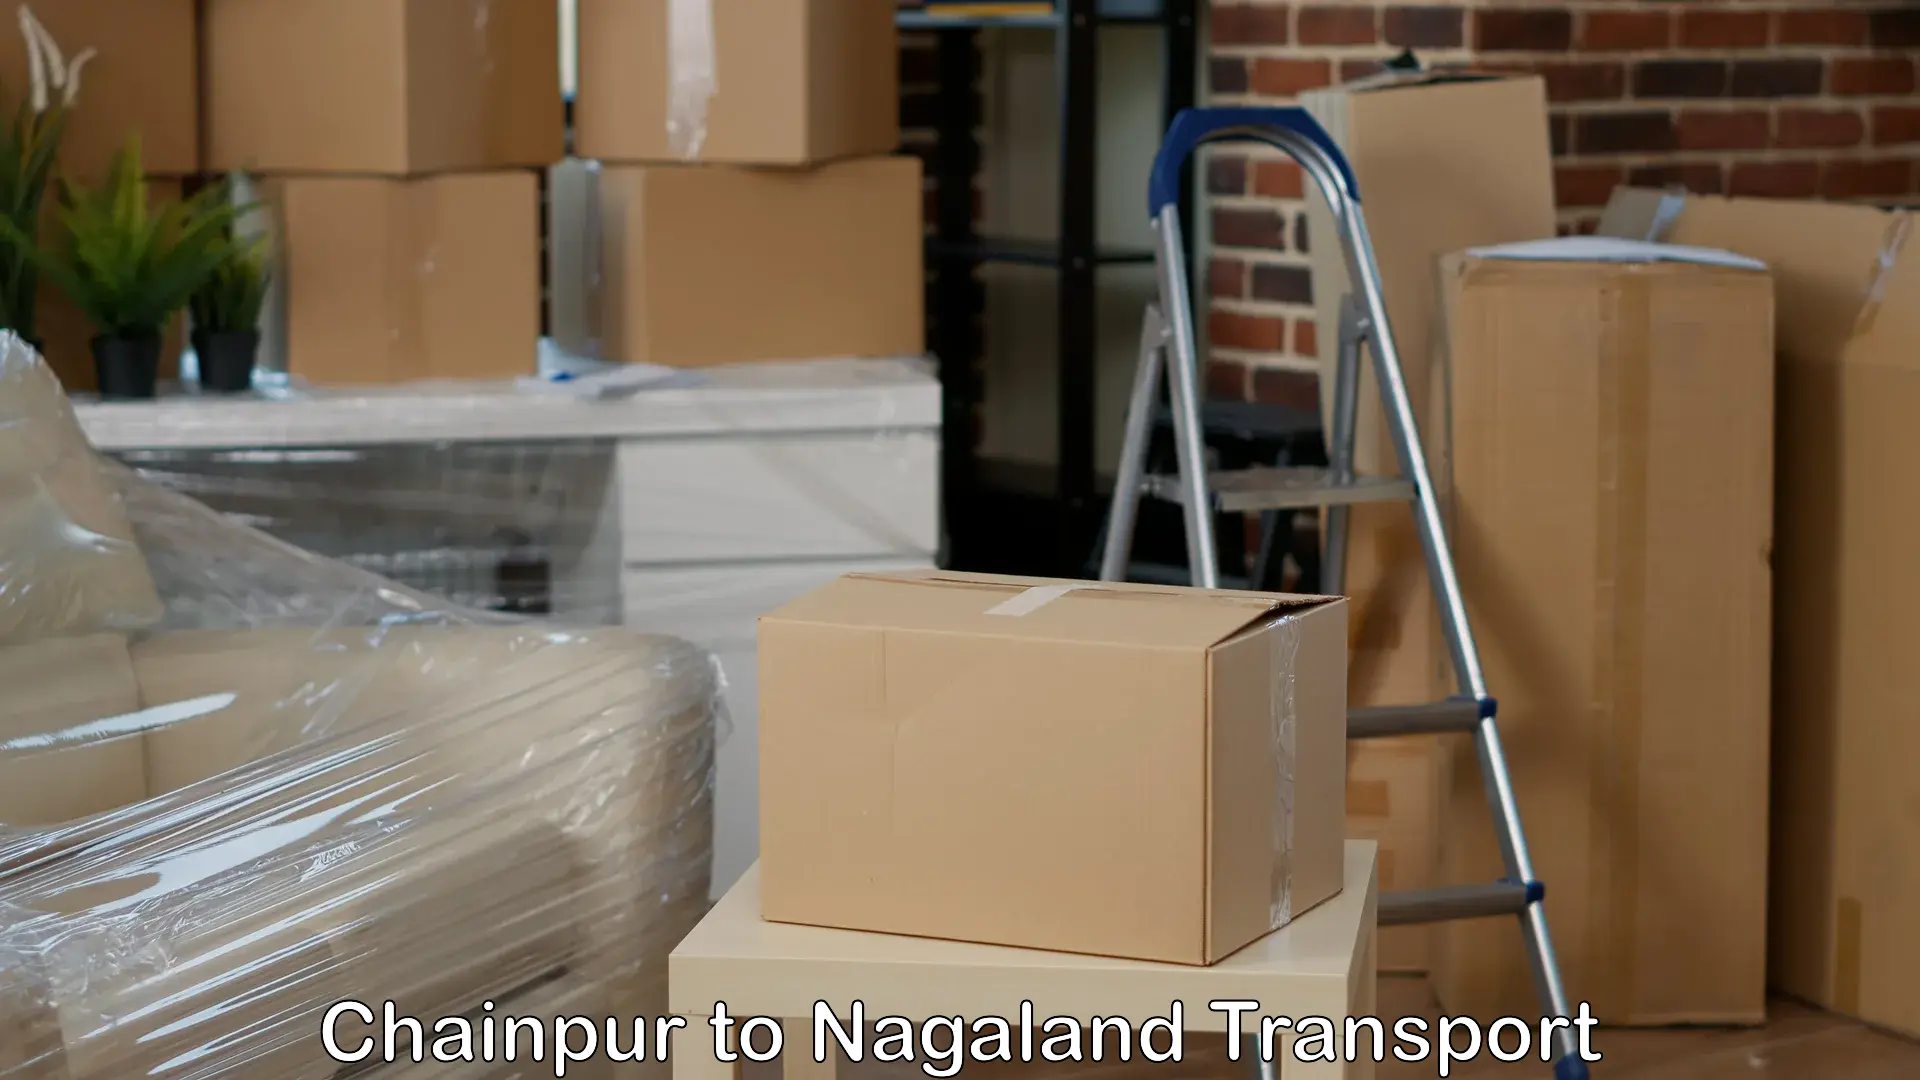 Pick up transport service in Chainpur to Nagaland